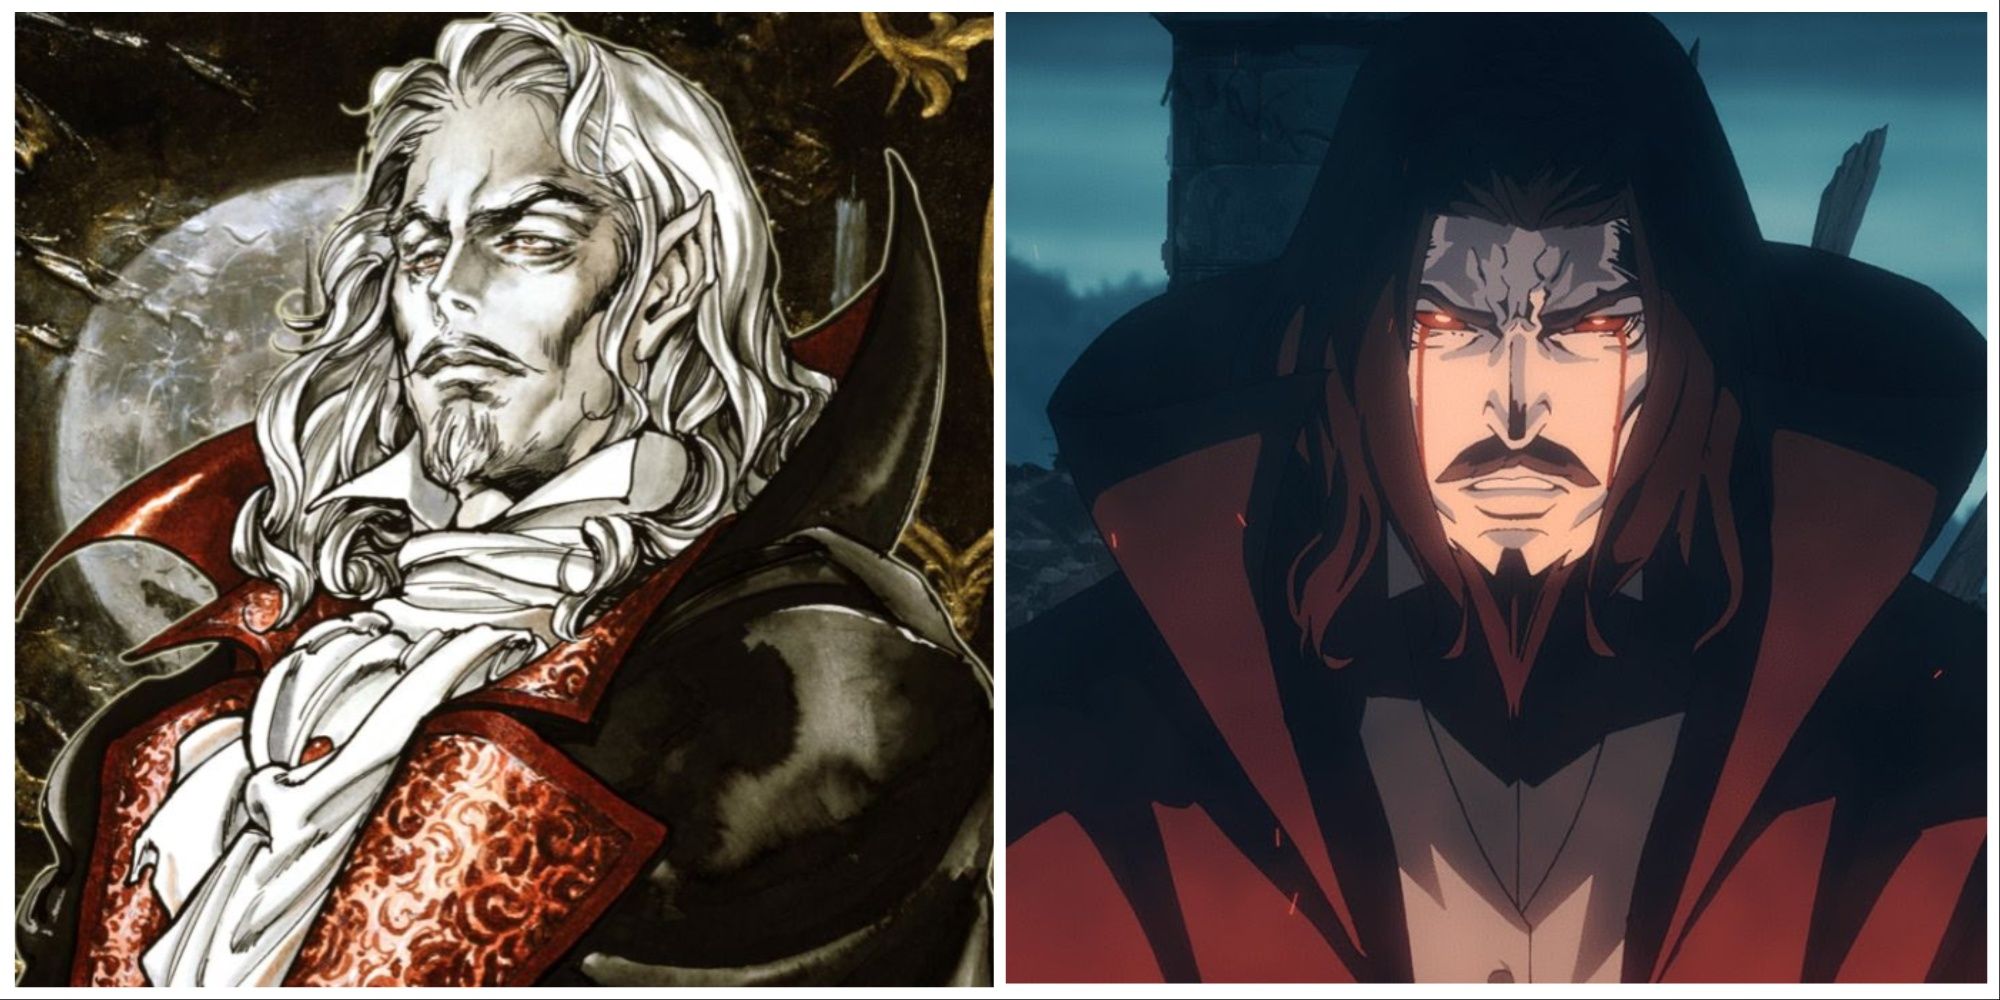 Dracula depicted in Castlevania: Symphony of the Night and the Netflix series